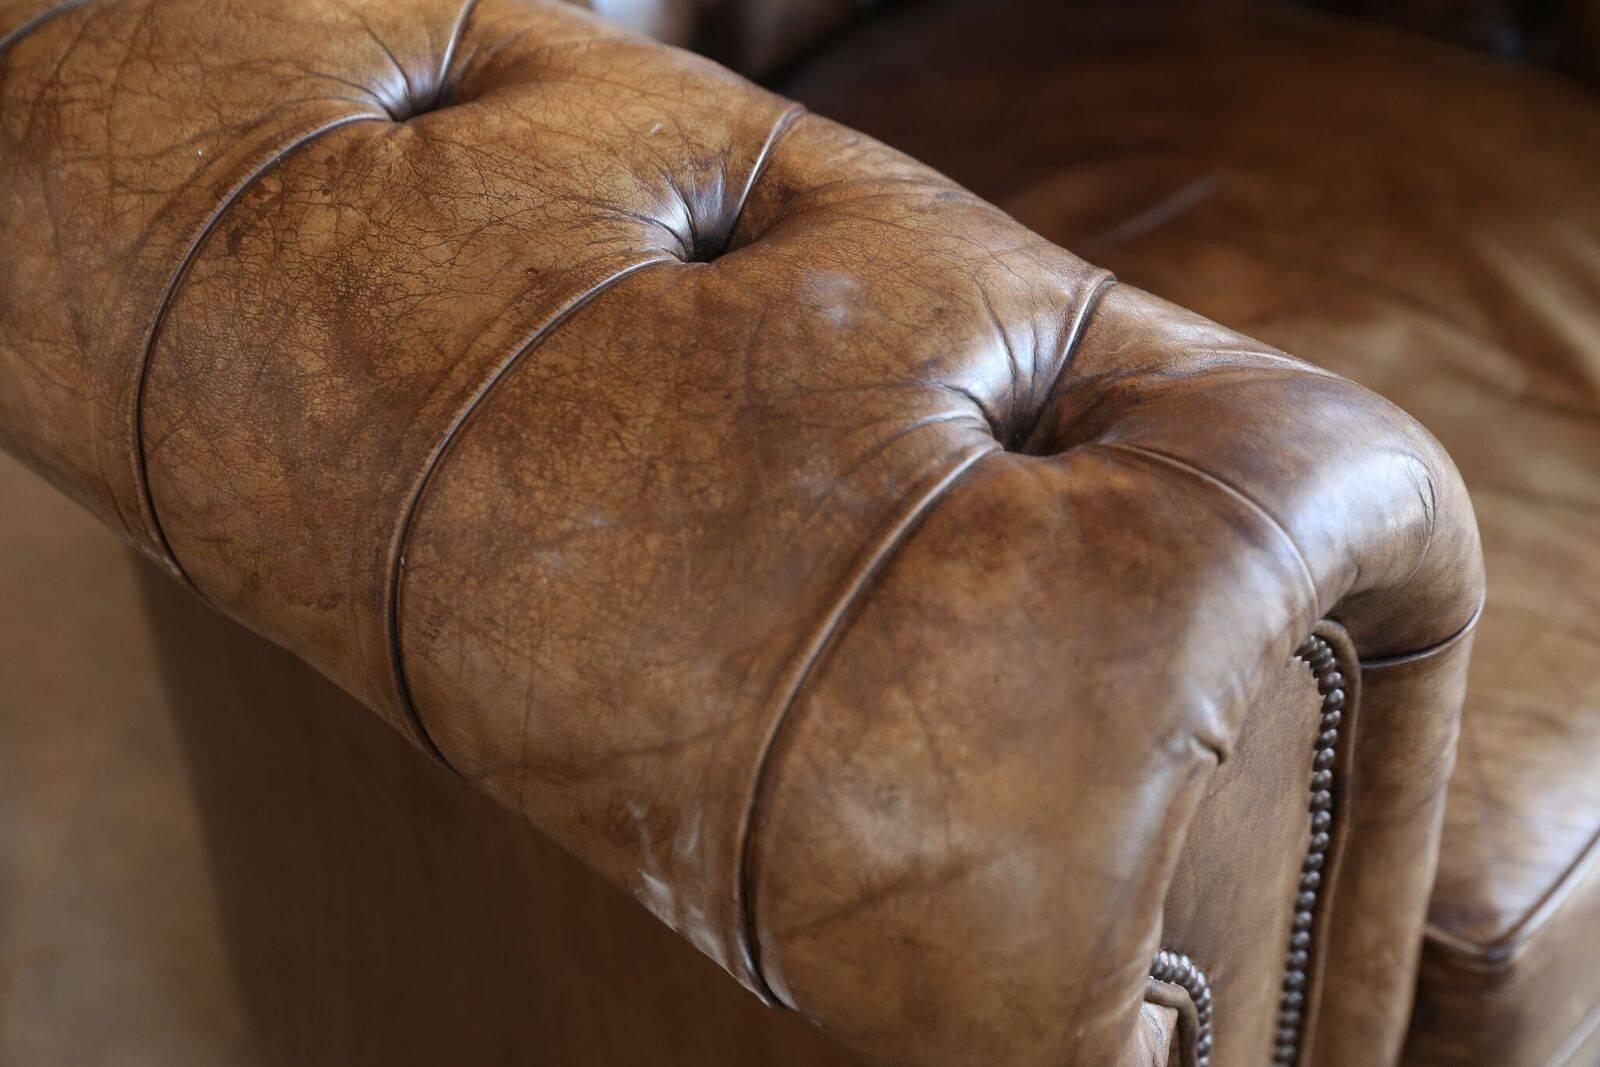 chesterfield chairs